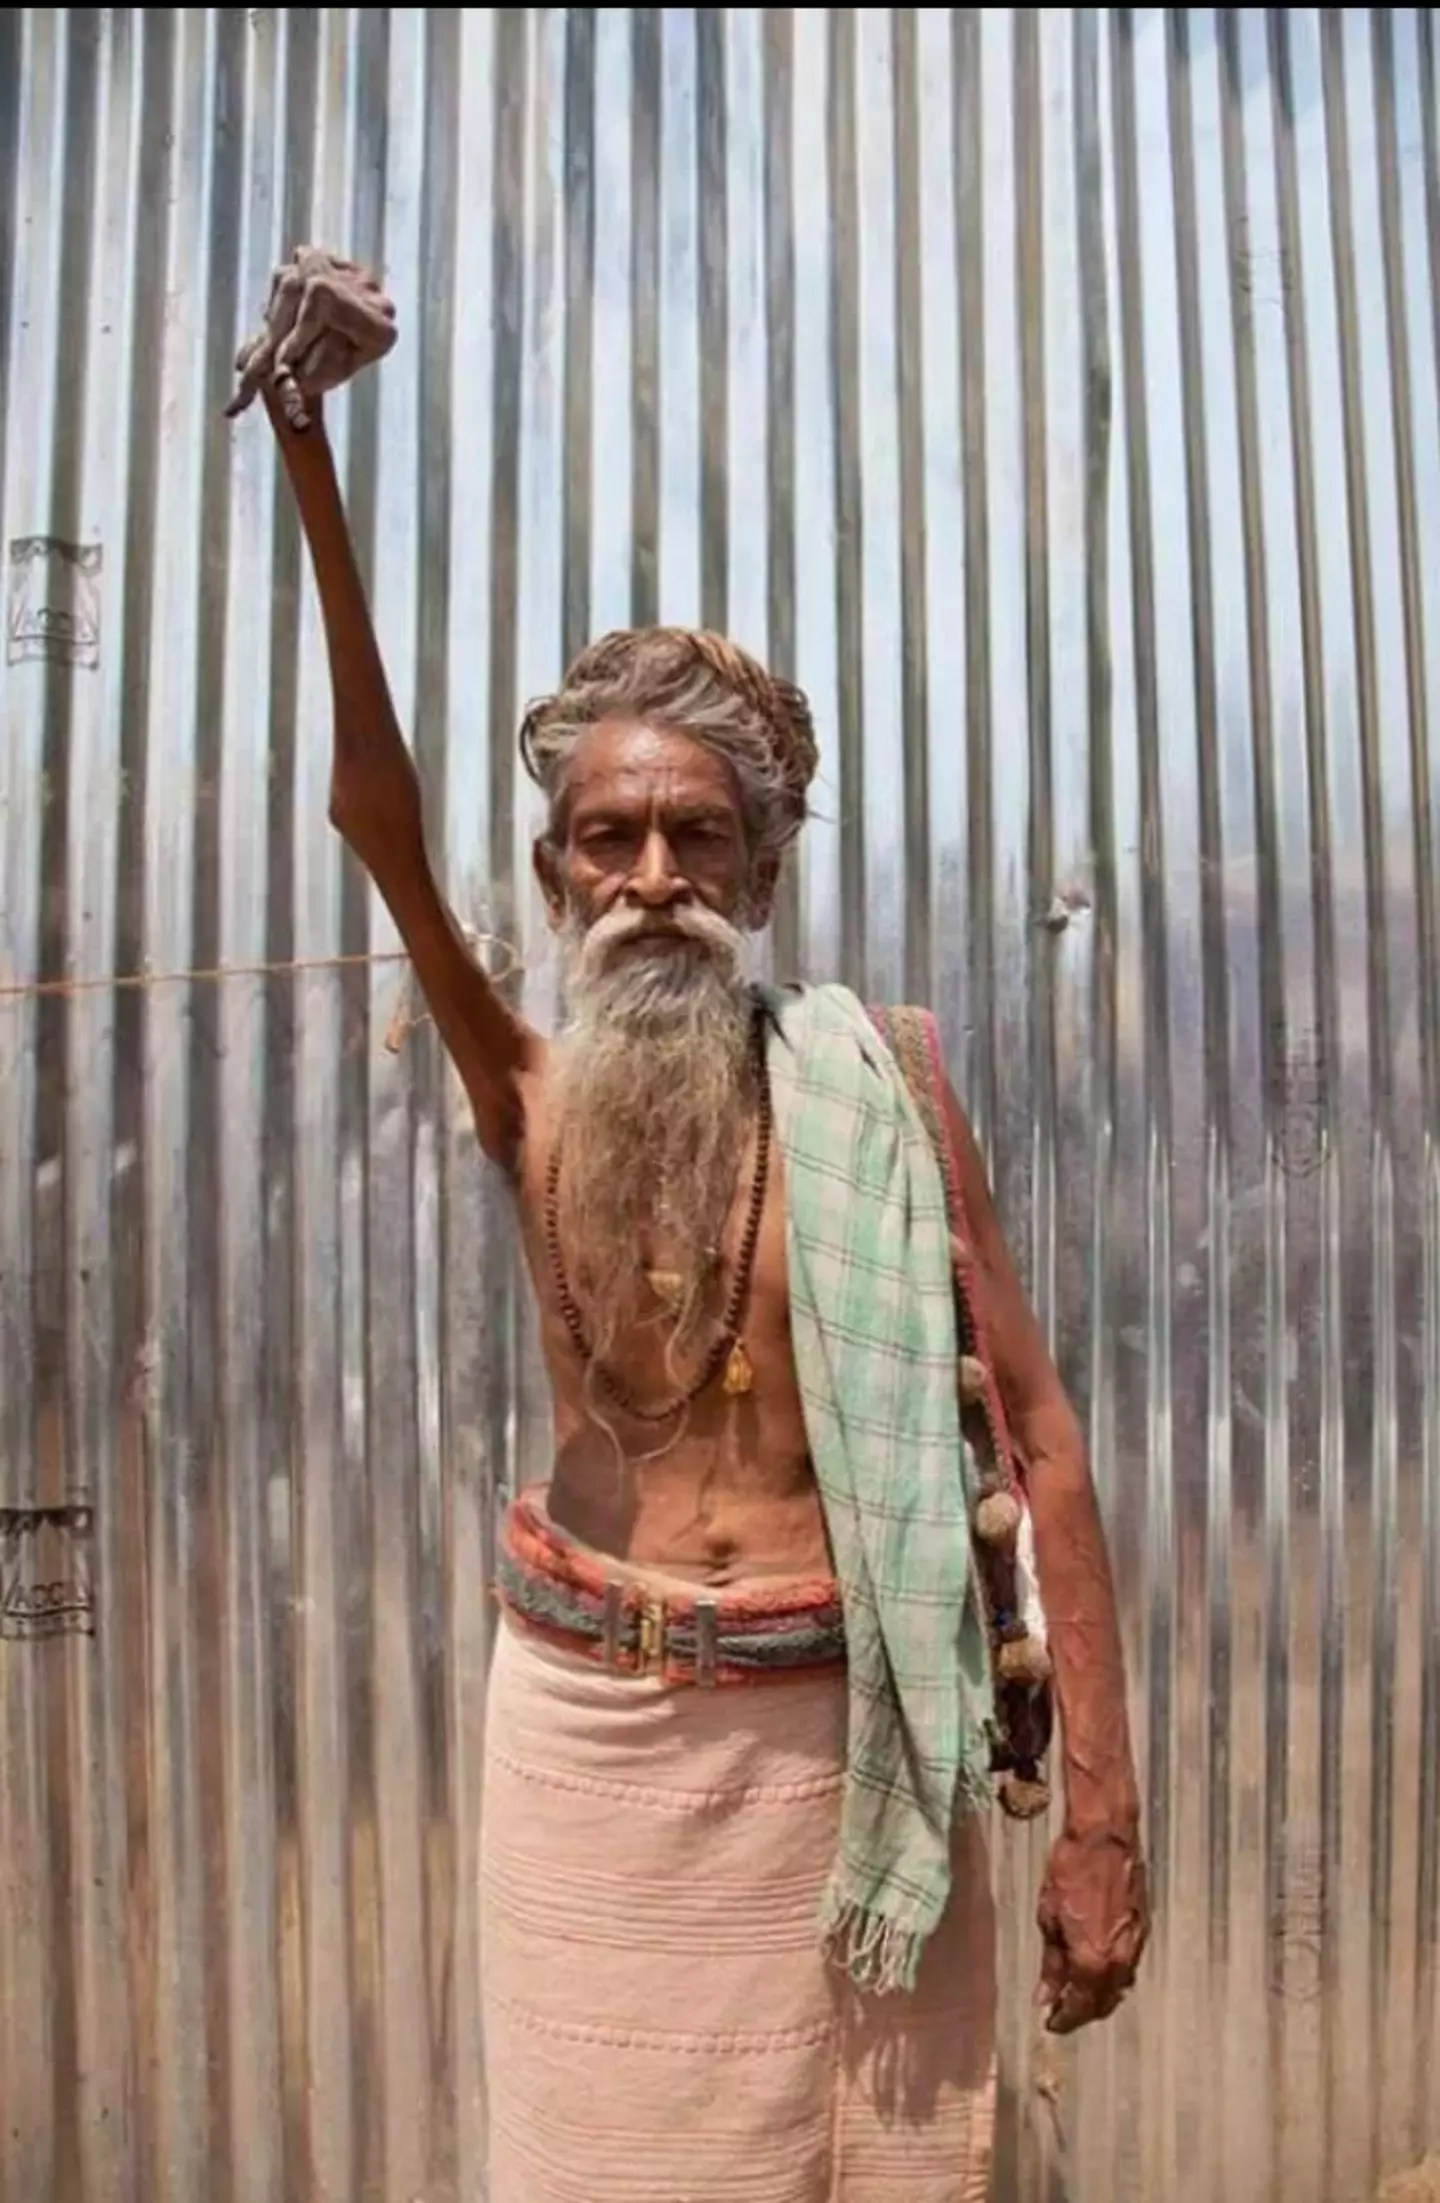 Bharati has been holding up his arm for nearly 50 years.